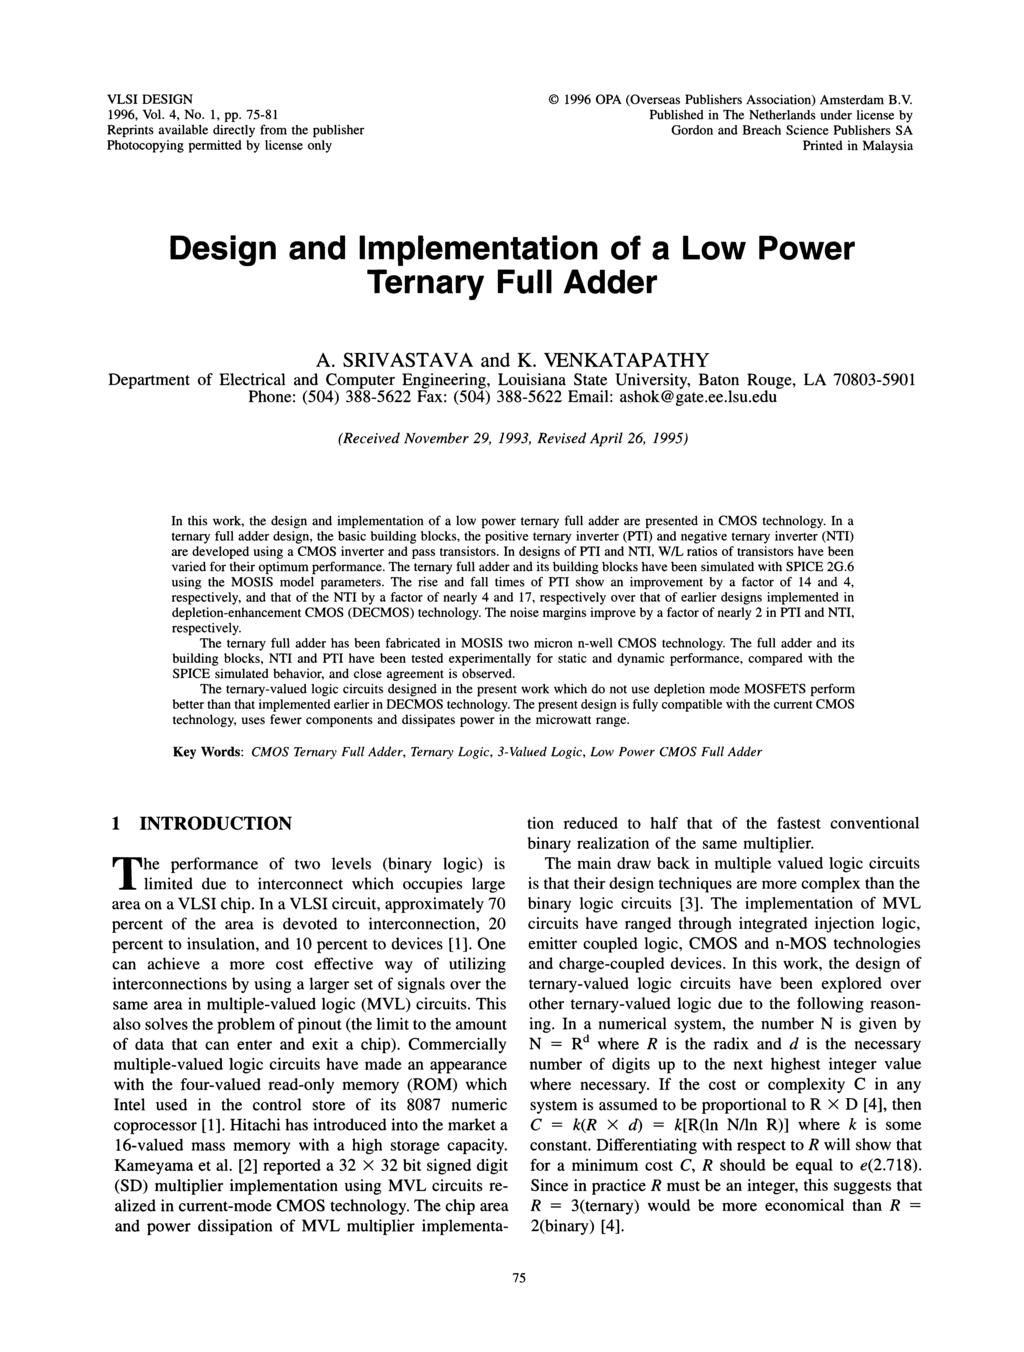 VLSI DESIGN 1996, Vol. 4, No. 1, pp. 75-81 Reprints available directly from the publisher Photocopying permitted by license only (C) 1996 OPA (Overseas Publishers Association) Amsterdam B.V. Published in The Netherlands under license by Gordon and Breach Science Publishers SA Printed in Malaysia Design and Implementation of a Low Power Ternary Full Adder A.